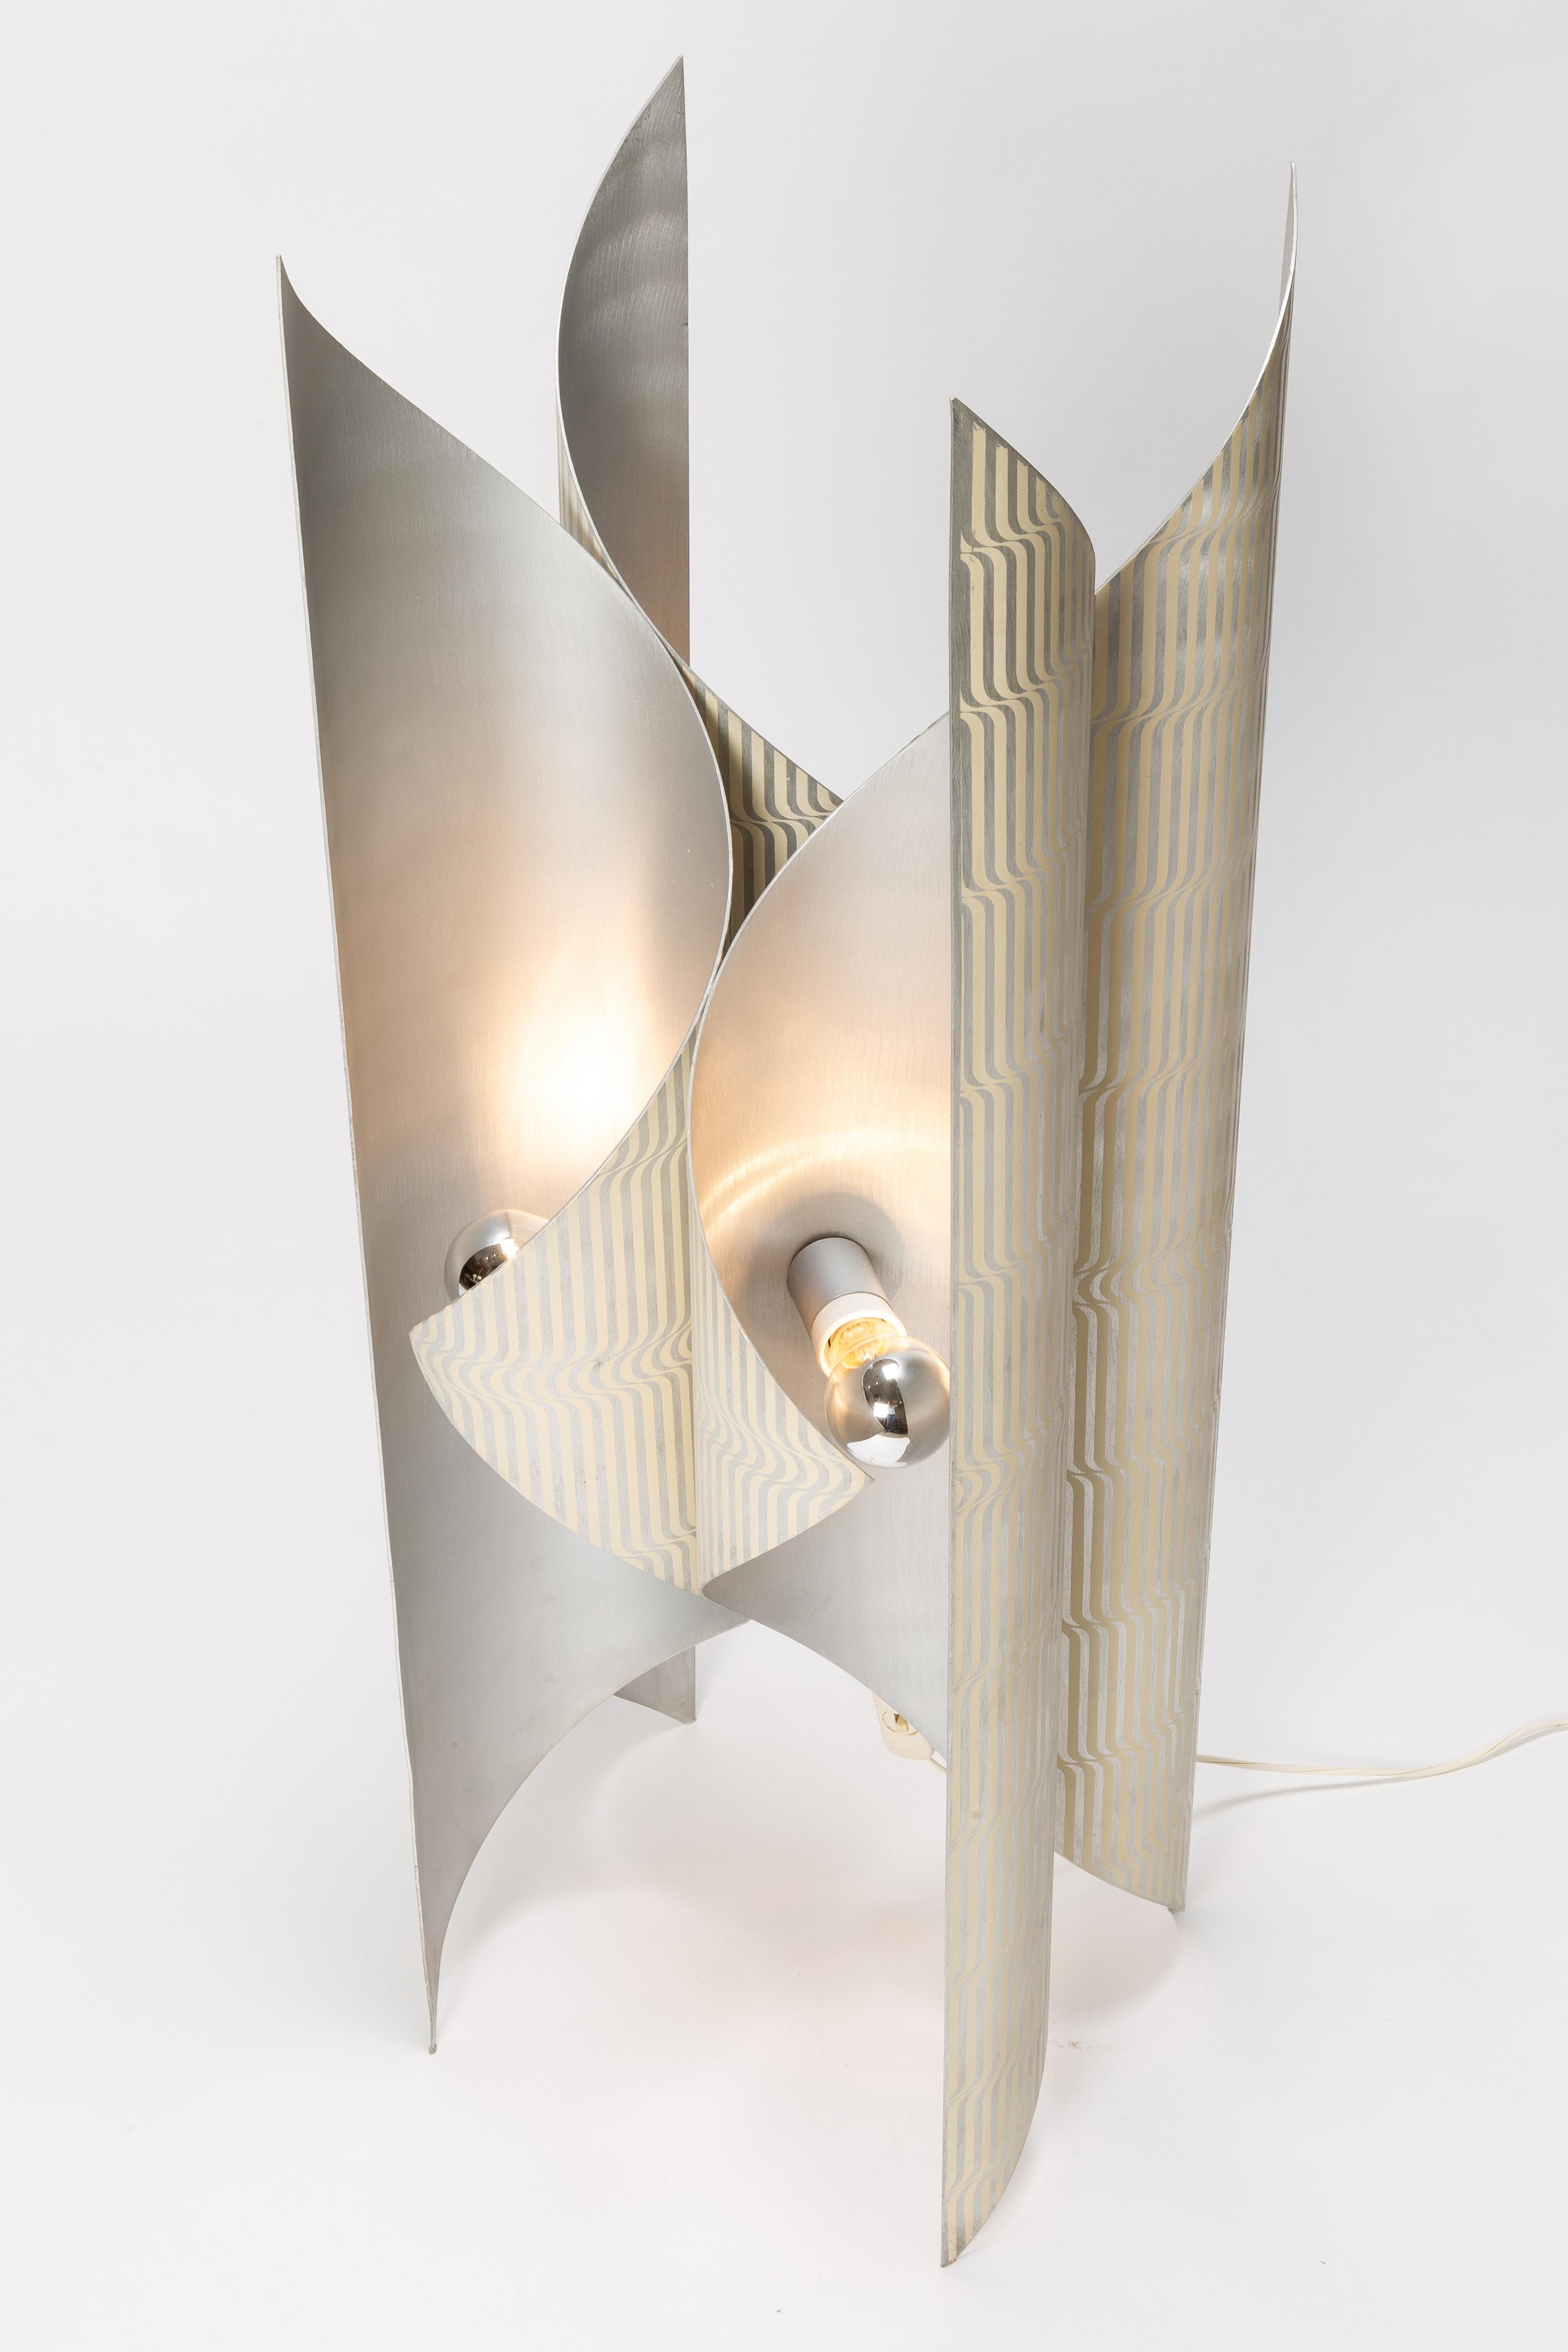 Lorenzo Burchiellaro floor lamp manufactured by the Atelier Lorenzo Burchiellaro in the 1970s in Italy. Floor lamp made of four curved aluminum triangels. Lacquered pattern on the outside and four indirect light bulbs on the inside.